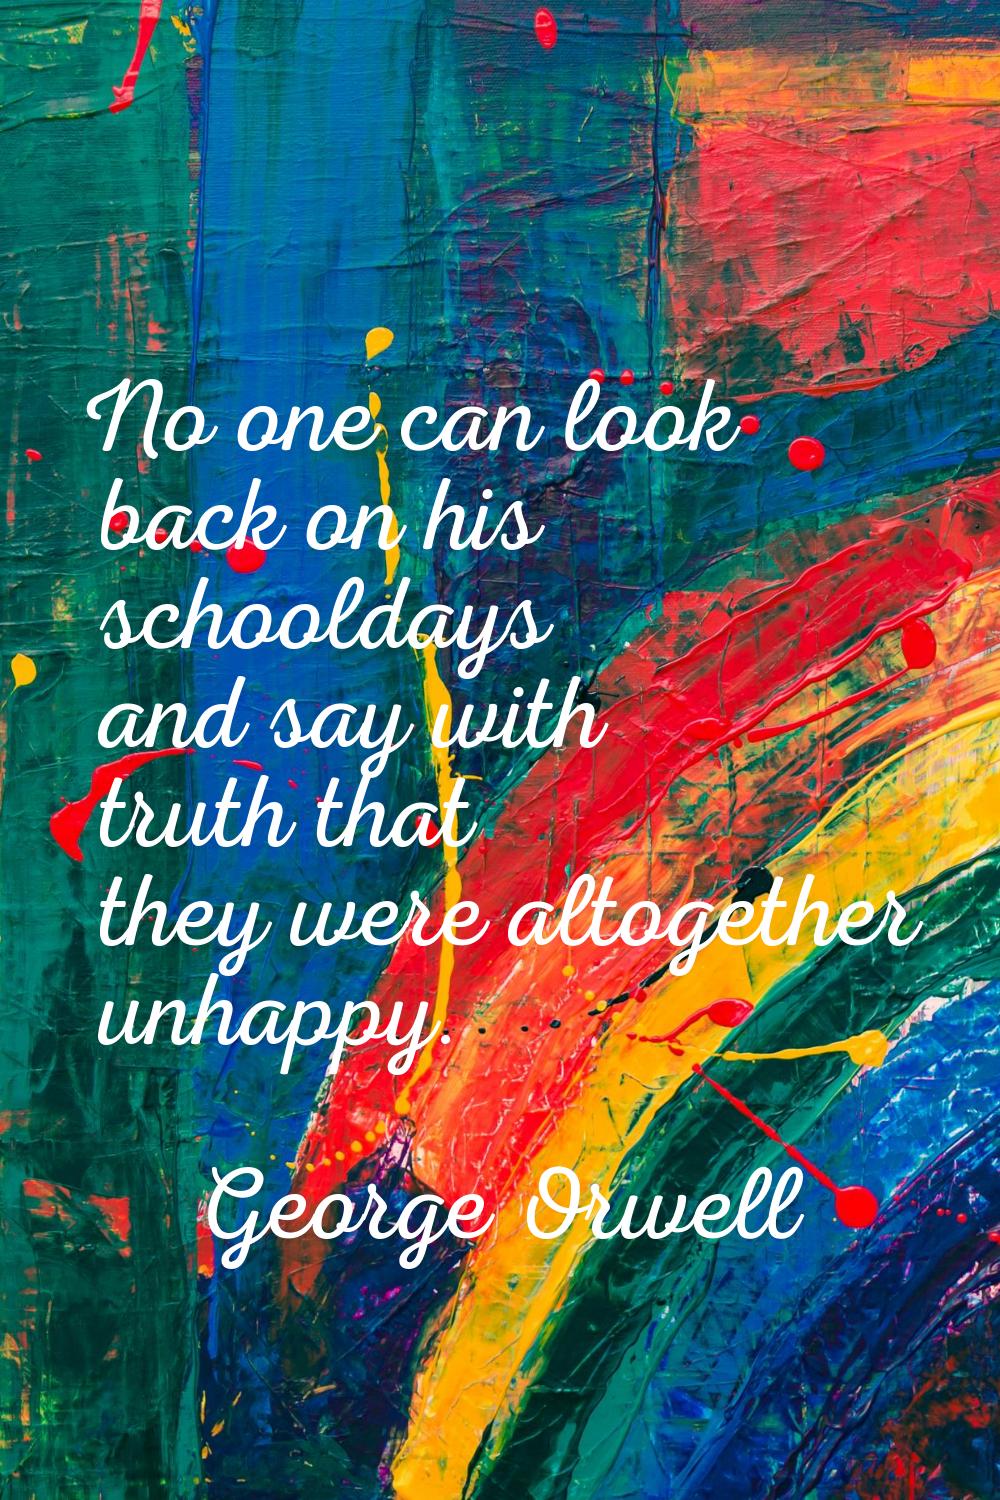 No one can look back on his schooldays and say with truth that they were altogether unhappy.